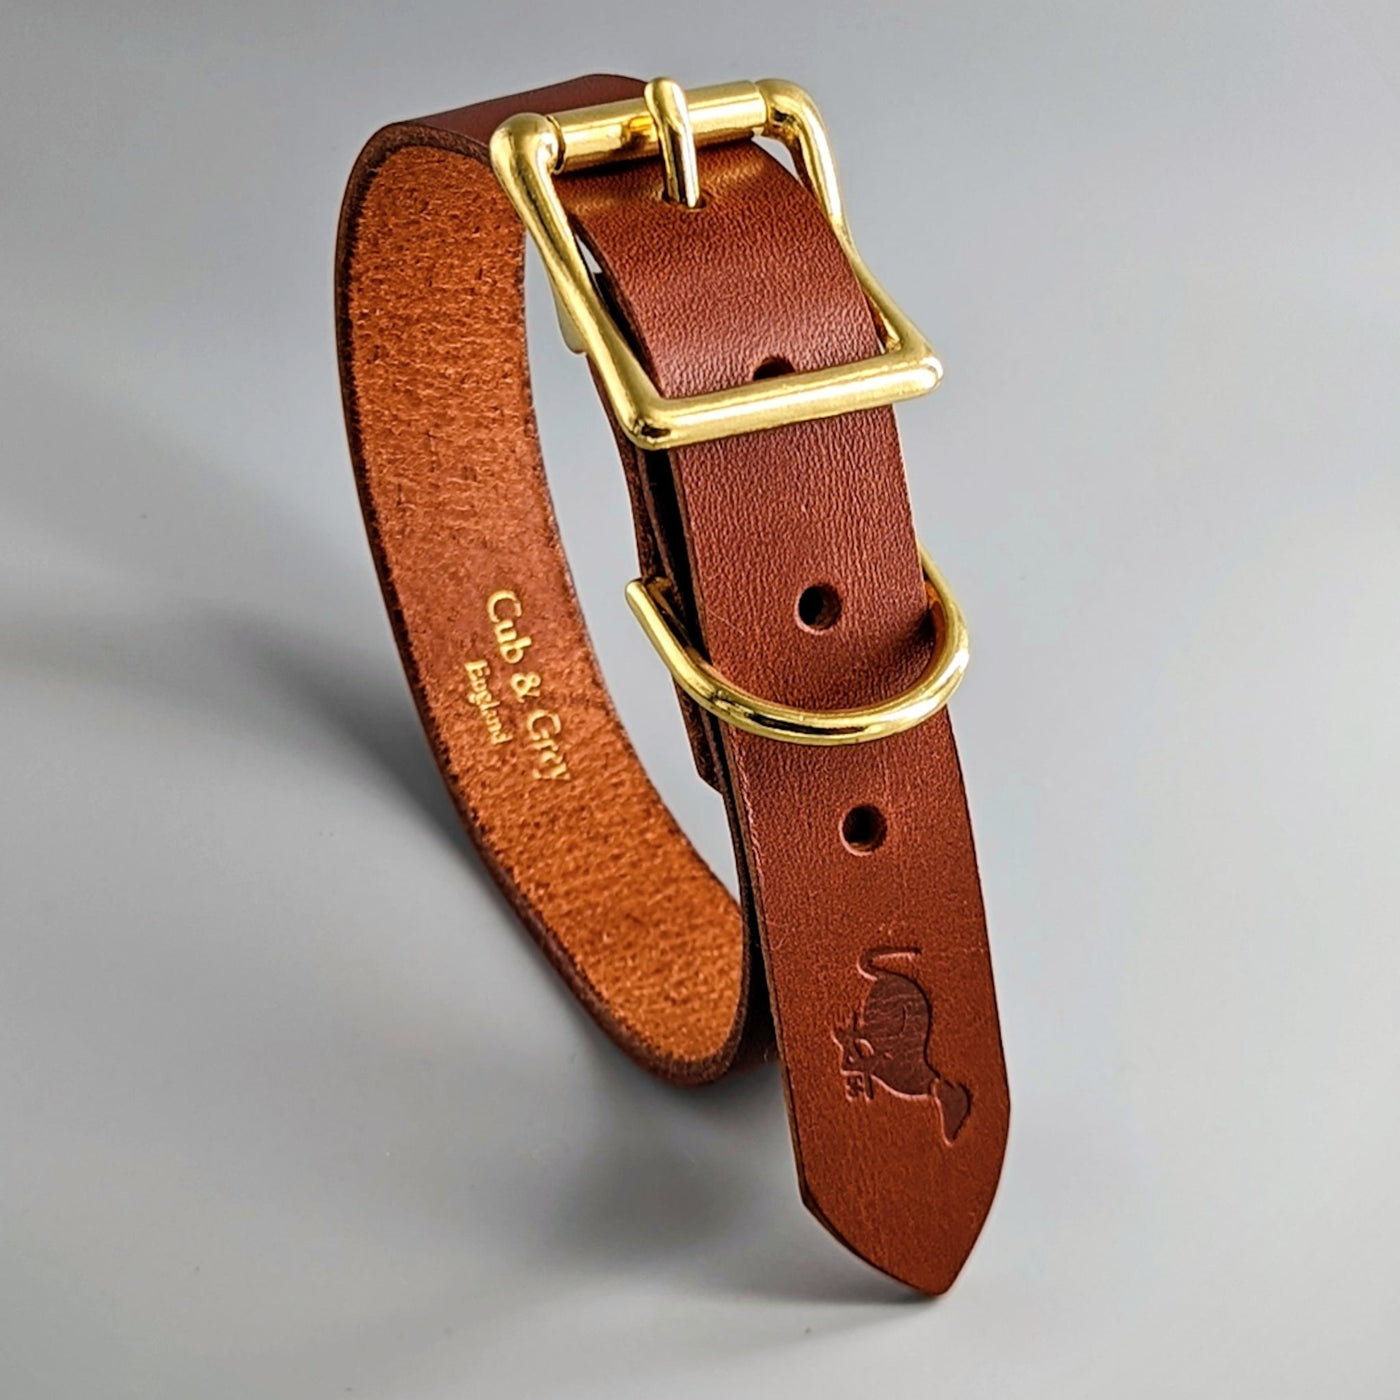 Personalised Leather Dog Collar in Whisky Tan with brass